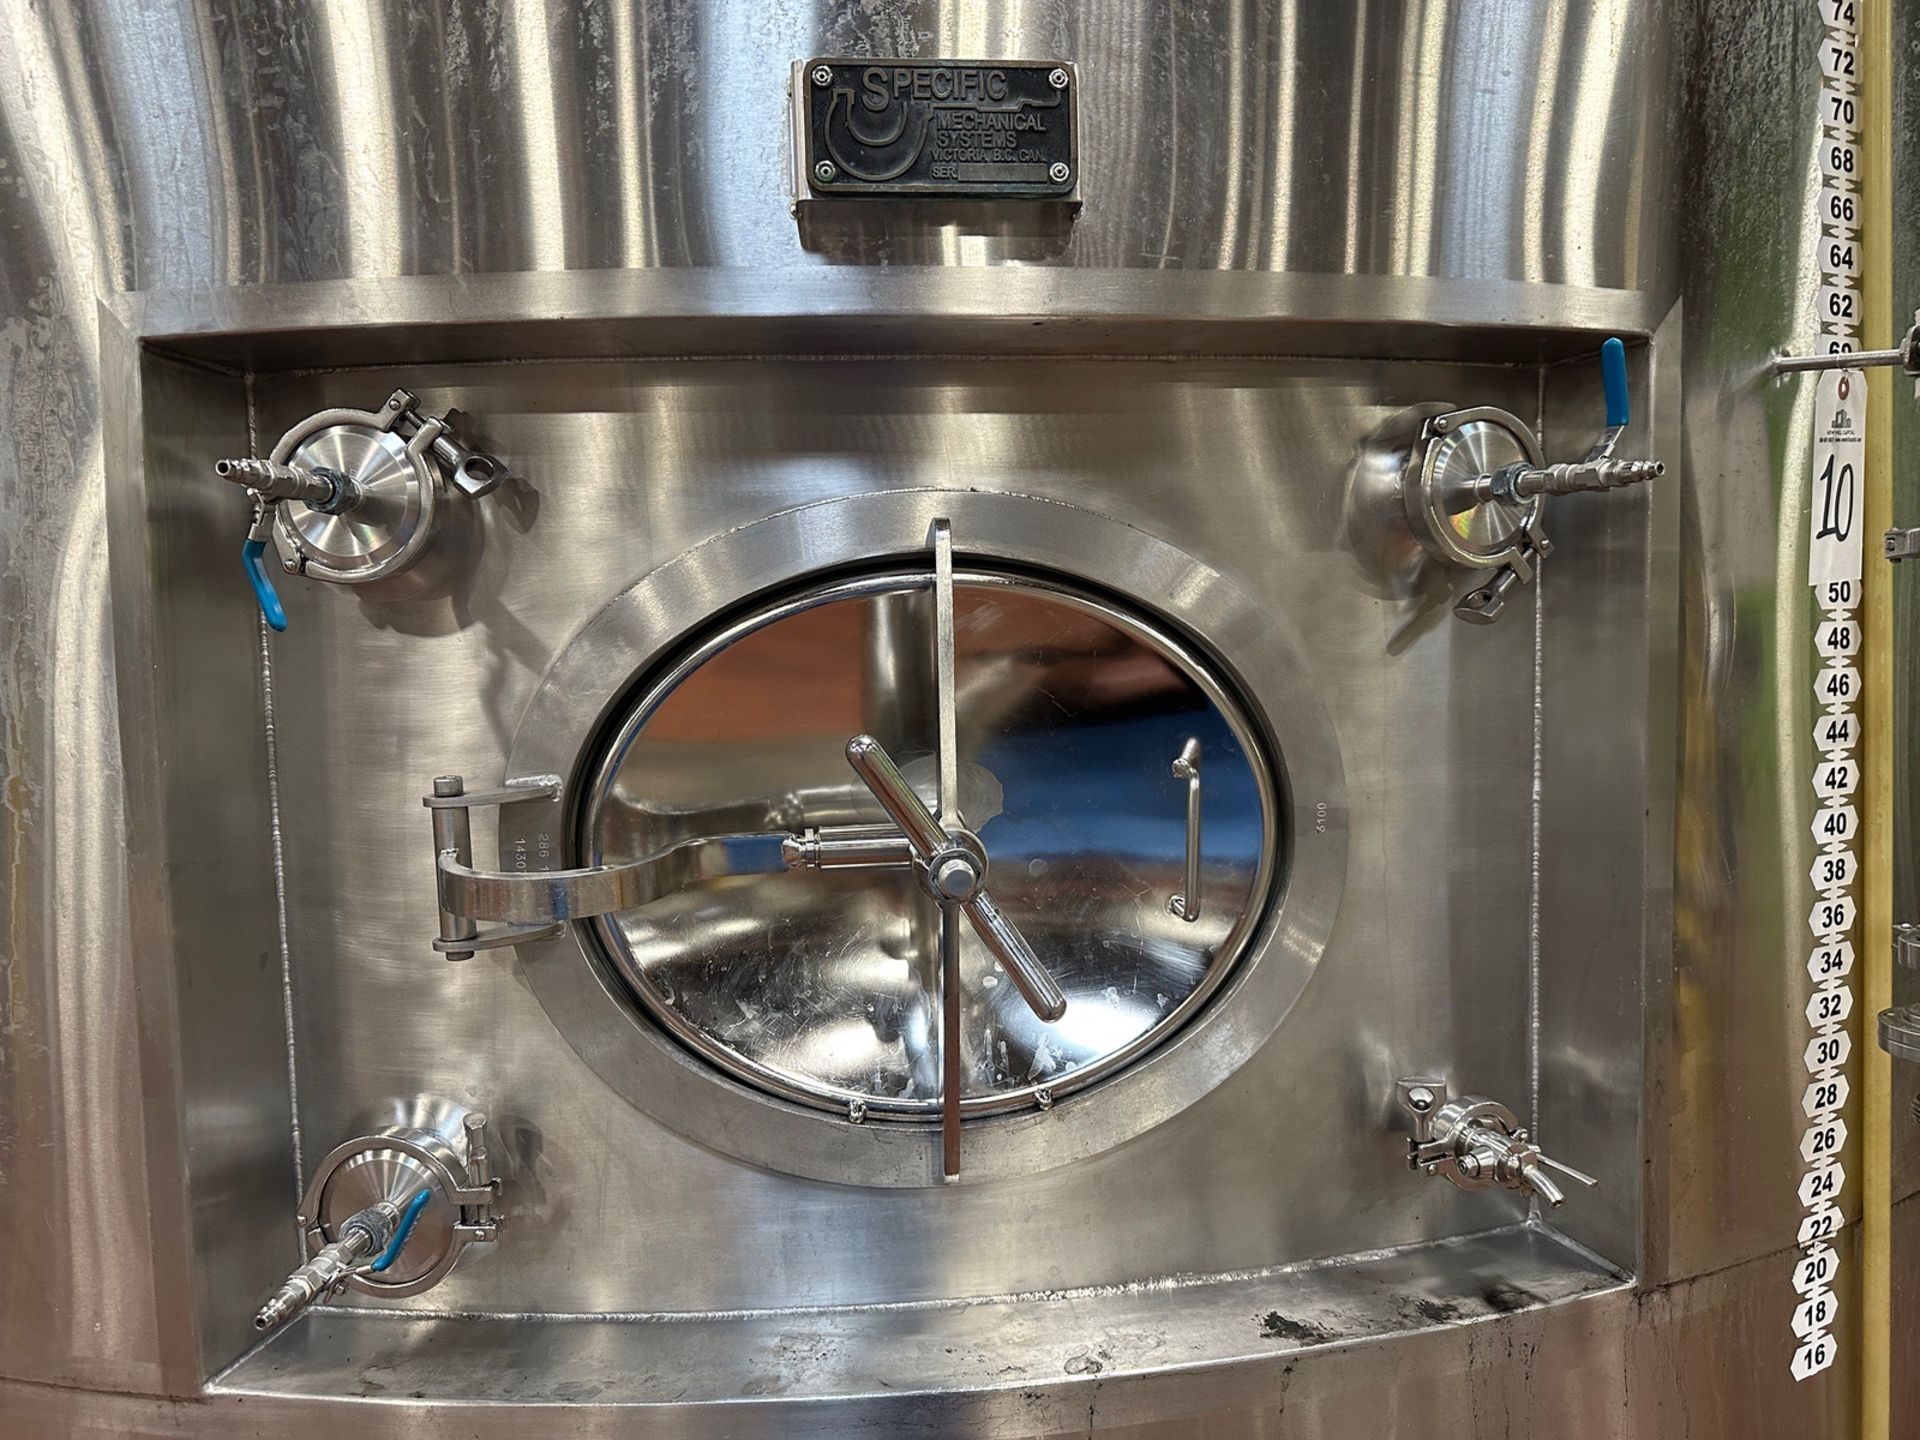 2017 - 300 BBL Specific Mechanical Stainless Steel Brite Tank - Dish Bottom, Glycol | Rig Fee $1550 - Image 6 of 8